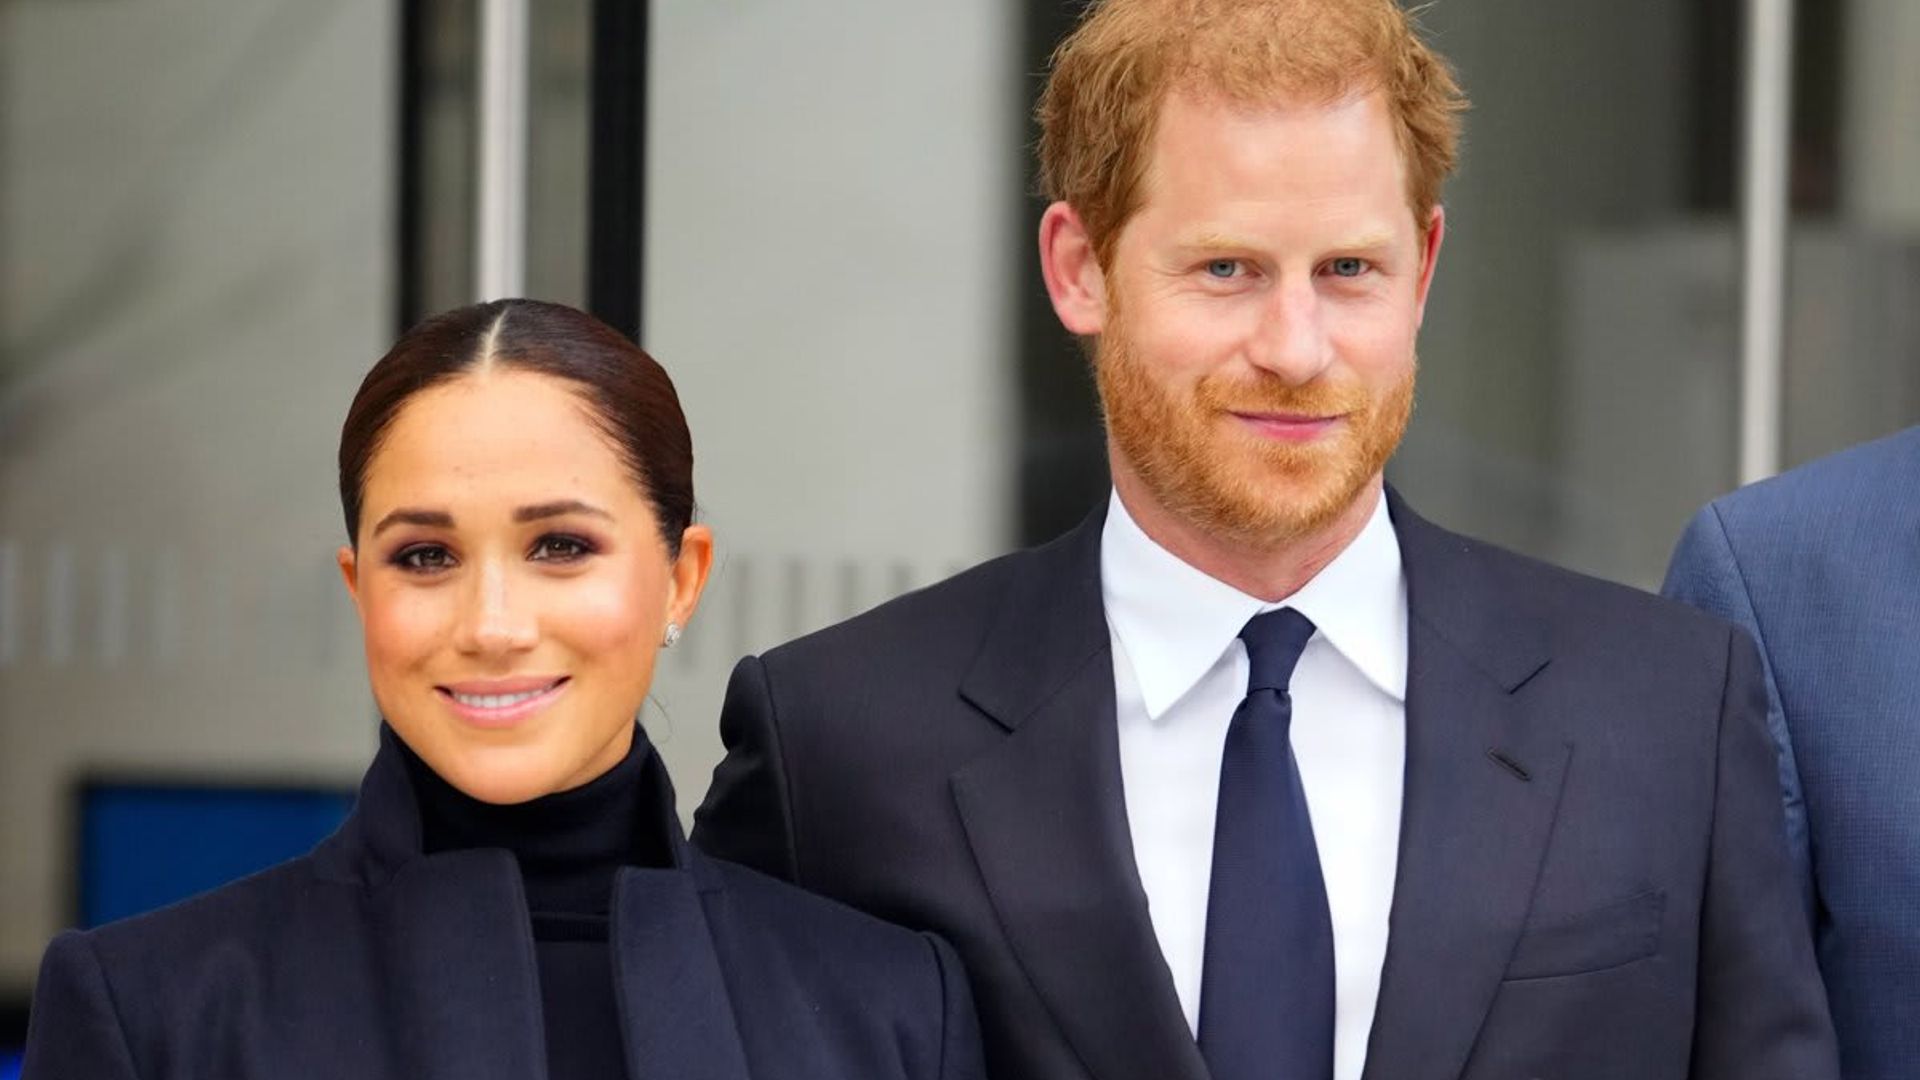 Find out what Meghan Markle and Prince Harry's company has pledged to do by 2030